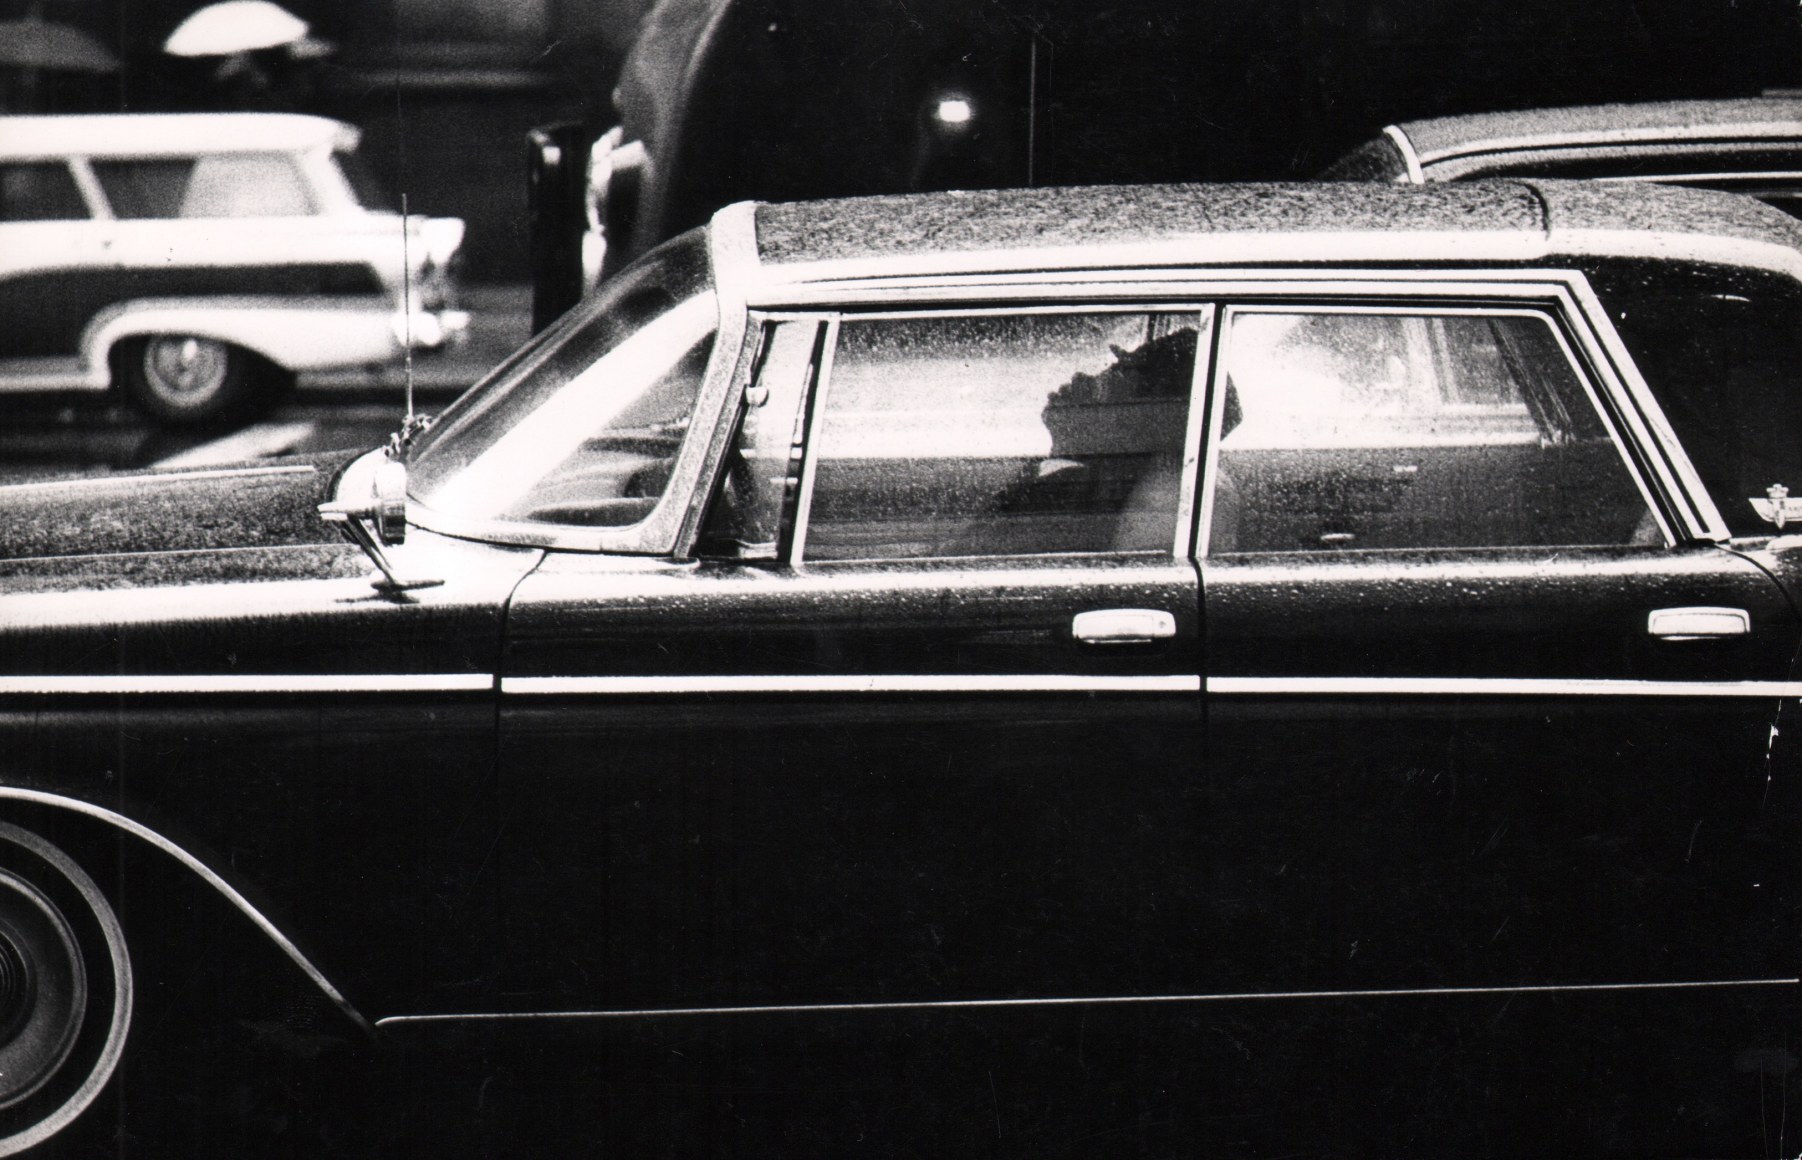 2B. Jan Lukas, New York, 1964. Side view of a man sleeping in the front seat of a parked car.